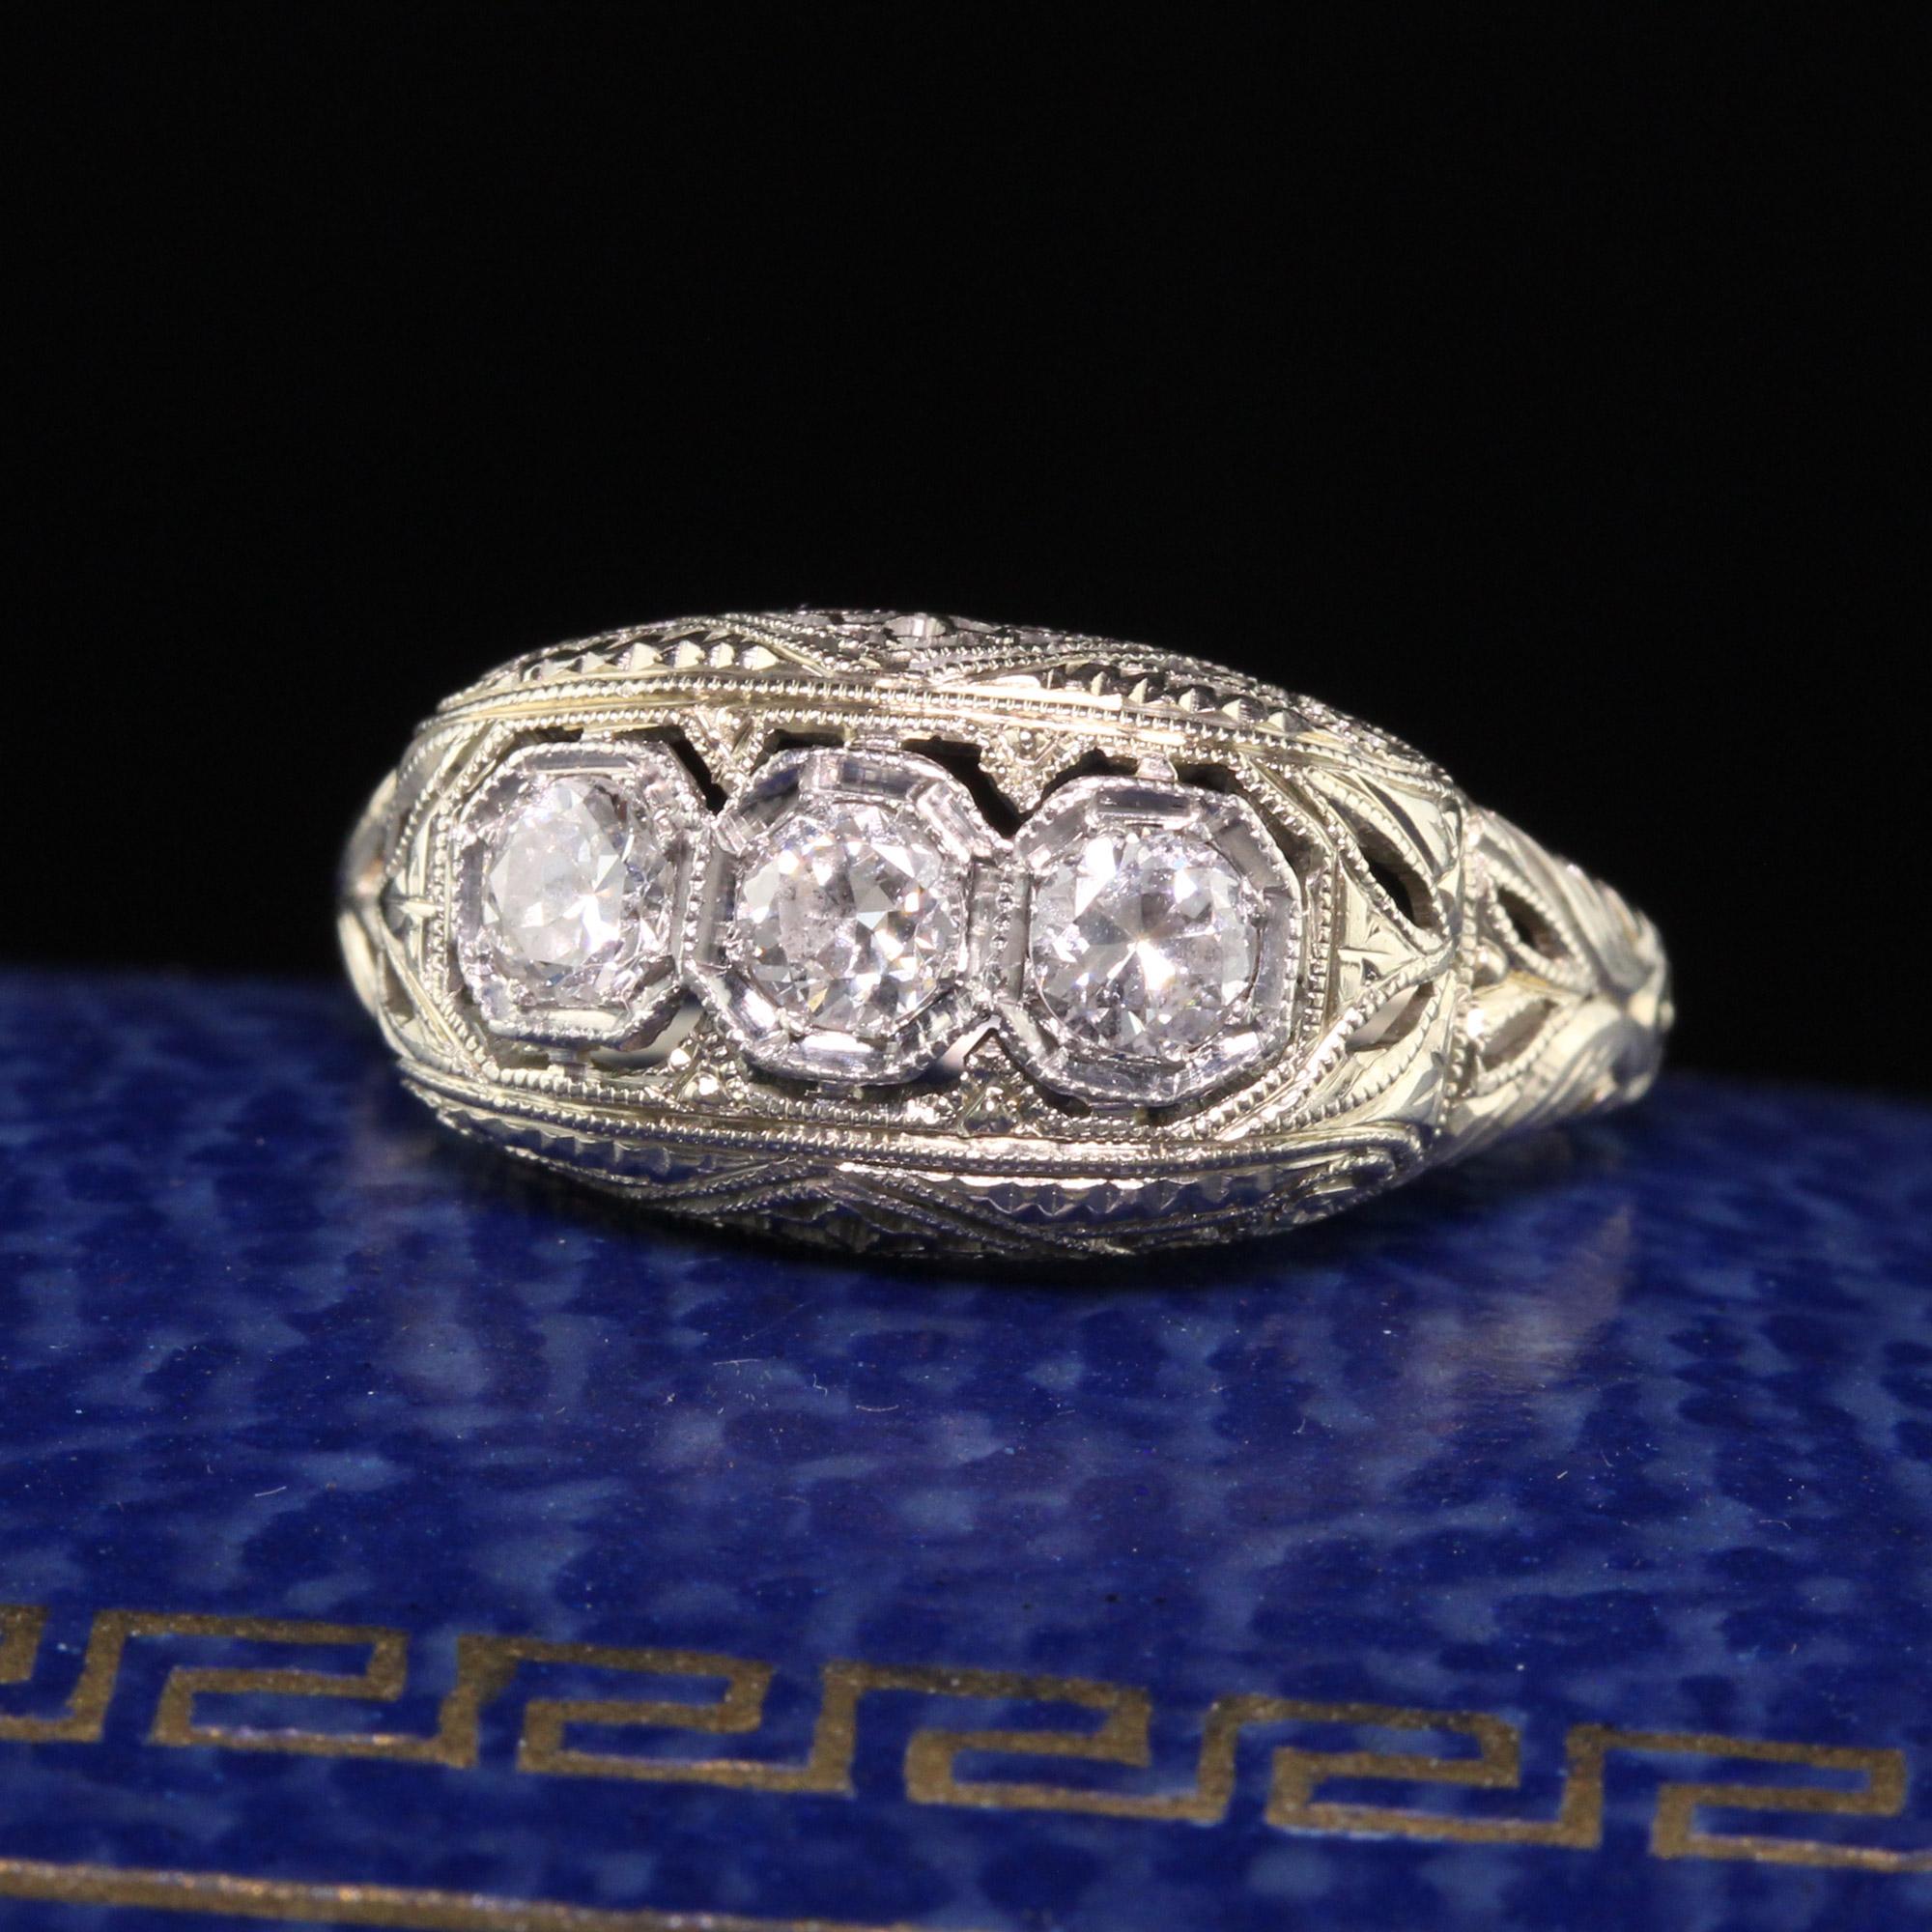 Beautiful Antique Art Deco 18K White Gold and Platinum Old Euro Diamond Three Stone Ring. This gorgeous Art Deco ring is crafted in 18K white gold and platinum top. It has 3 old european cut diamonds that are white and clean in a filigree